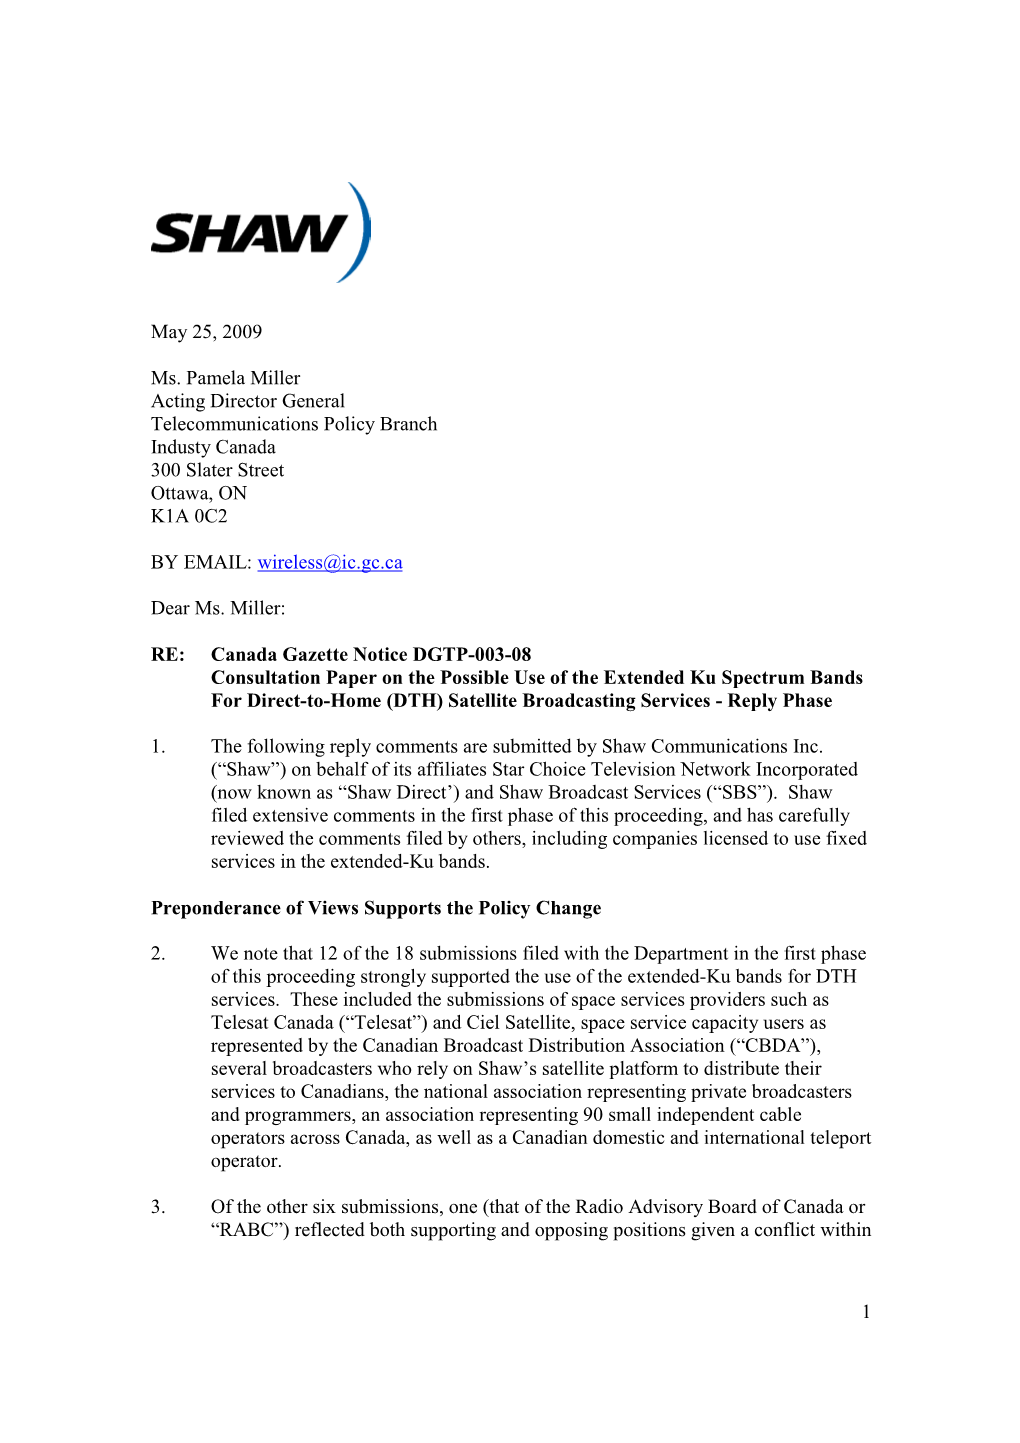 Reply Comments Are Submitted by Shaw Communications Inc